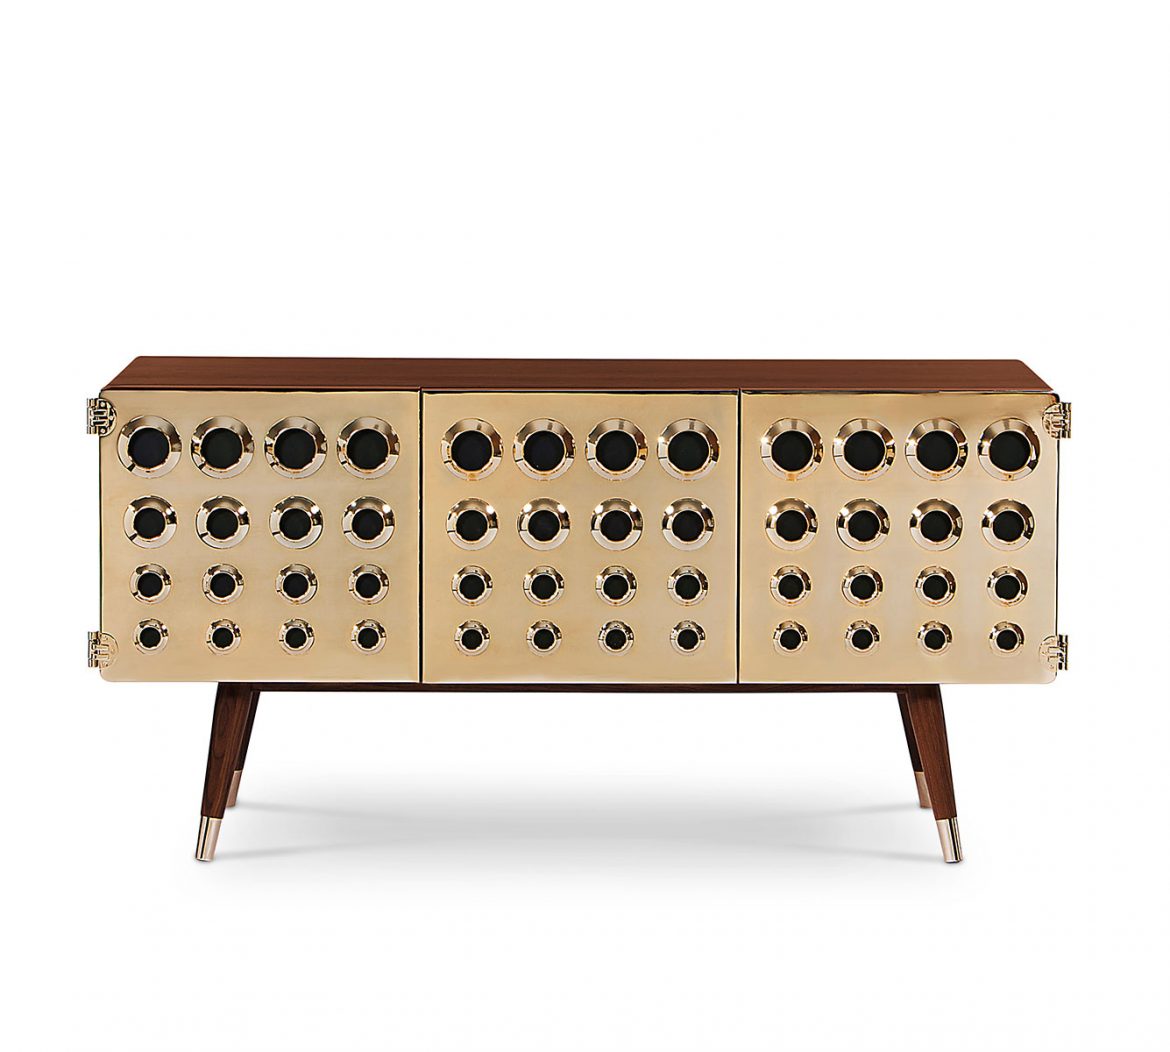 Amazing Mid-Century Furniture That You Can Find At Bredaquaranta